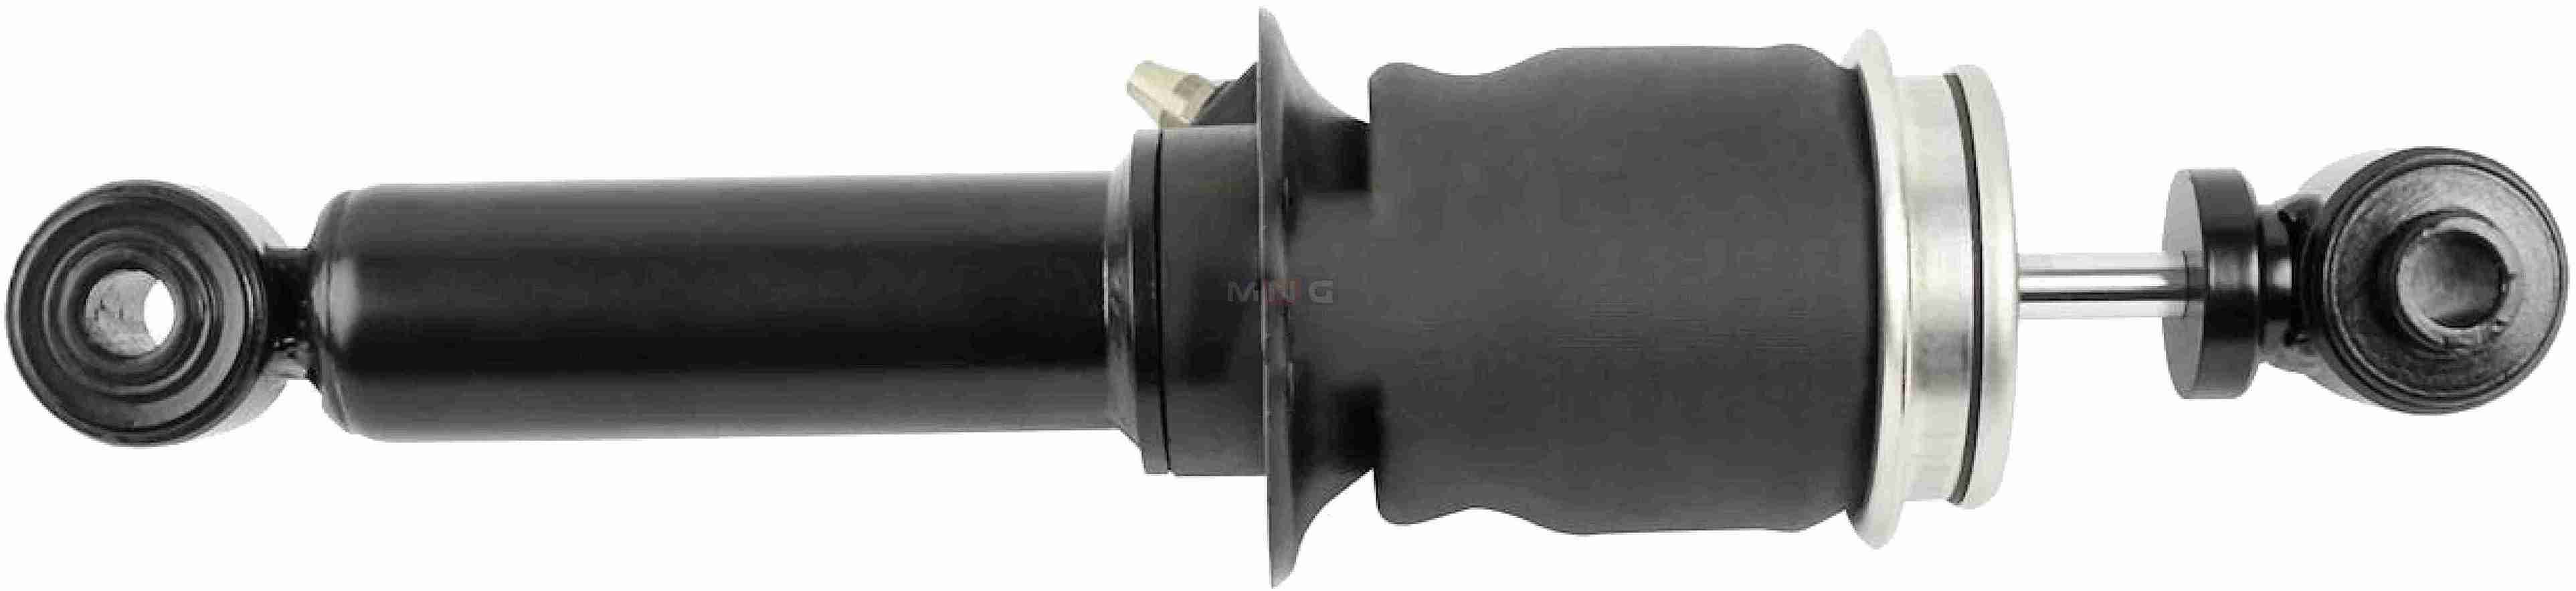 504060233-MNG-SHOCK-ABSORBER-IVECO